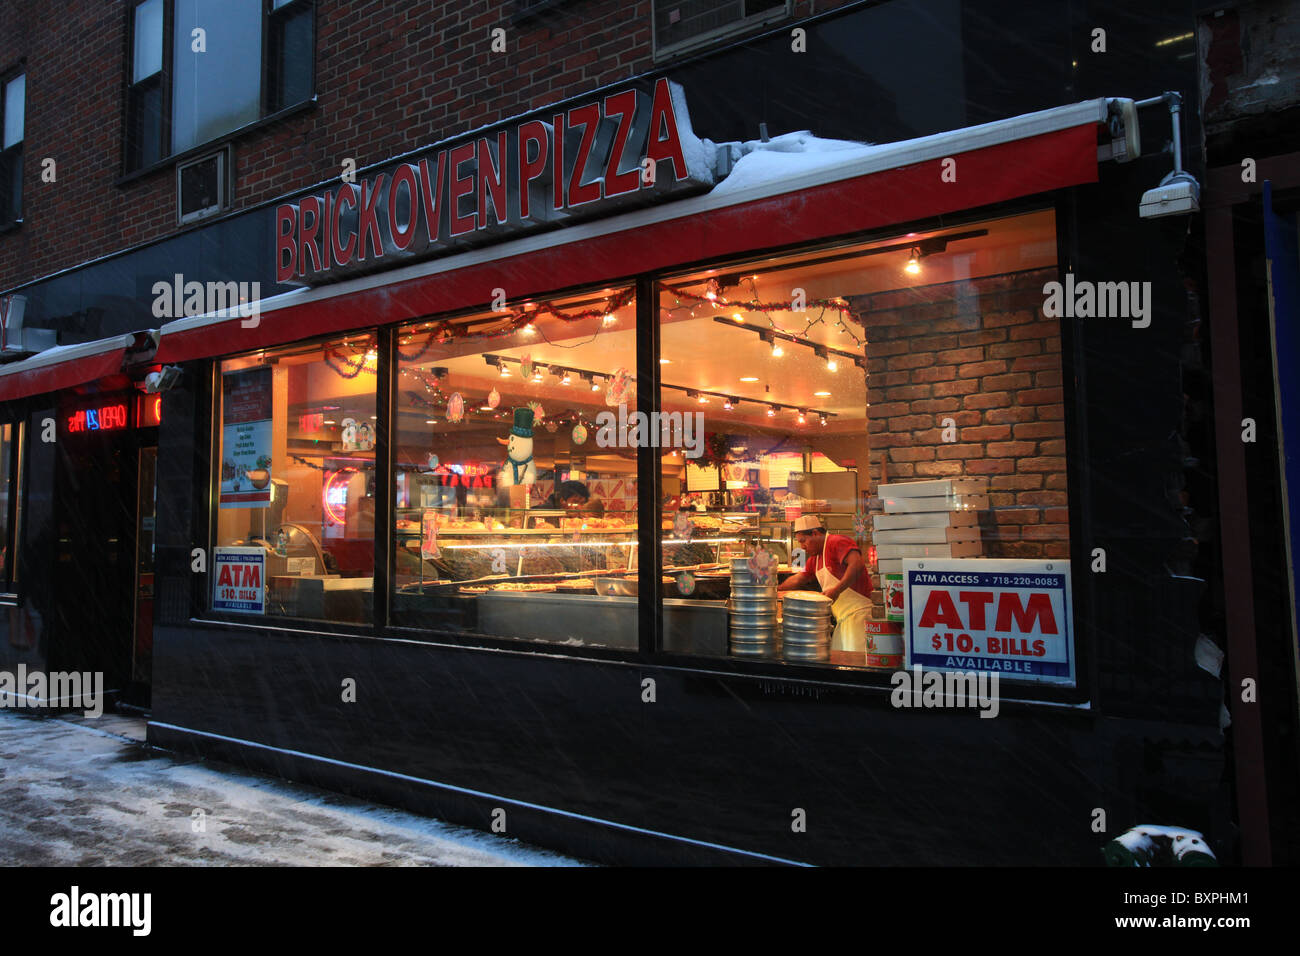 Brick oven pizza store on Third avenue, New York city, in the great blizzard that came in Christmas 2010 Stock Photo